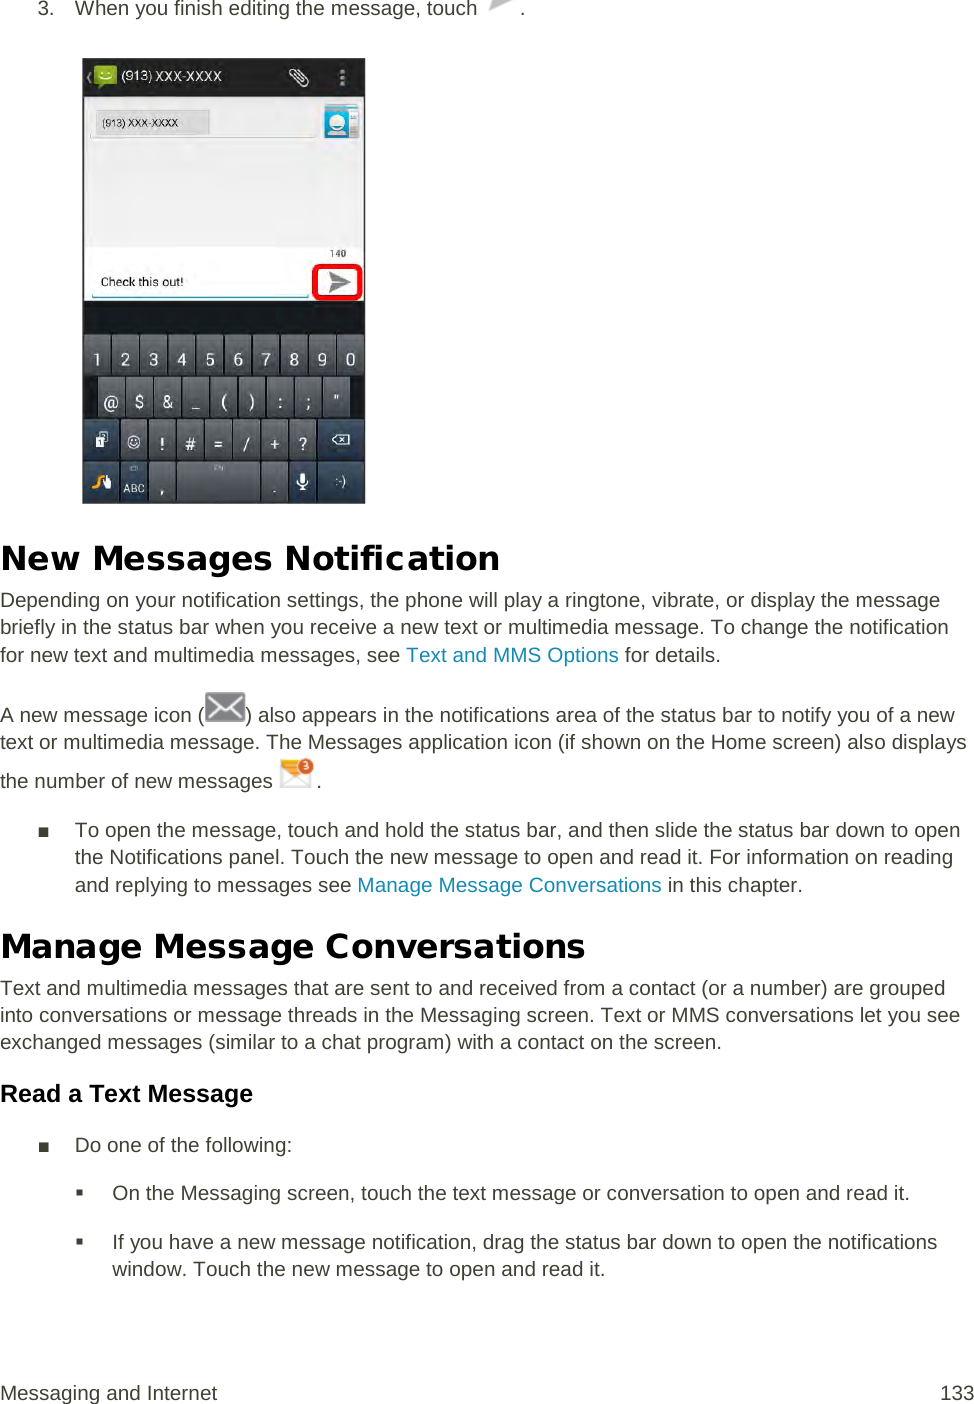 3. When you finish editing the message, touch  .   New Messages Notification Depending on your notification settings, the phone will play a ringtone, vibrate, or display the message briefly in the status bar when you receive a new text or multimedia message. To change the notification for new text and multimedia messages, see Text and MMS Options for details. A new message icon ( ) also appears in the notifications area of the status bar to notify you of a new text or multimedia message. The Messages application icon (if shown on the Home screen) also displays the number of new messages  . ■ To open the message, touch and hold the status bar, and then slide the status bar down to open the Notifications panel. Touch the new message to open and read it. For information on reading and replying to messages see Manage Message Conversations in this chapter. Manage Message Conversations Text and multimedia messages that are sent to and received from a contact (or a number) are grouped into conversations or message threads in the Messaging screen. Text or MMS conversations let you see exchanged messages (similar to a chat program) with a contact on the screen. Read a Text Message ■ Do one of the following:  On the Messaging screen, touch the text message or conversation to open and read it.  If you have a new message notification, drag the status bar down to open the notifications window. Touch the new message to open and read it. Messaging and Internet 133 